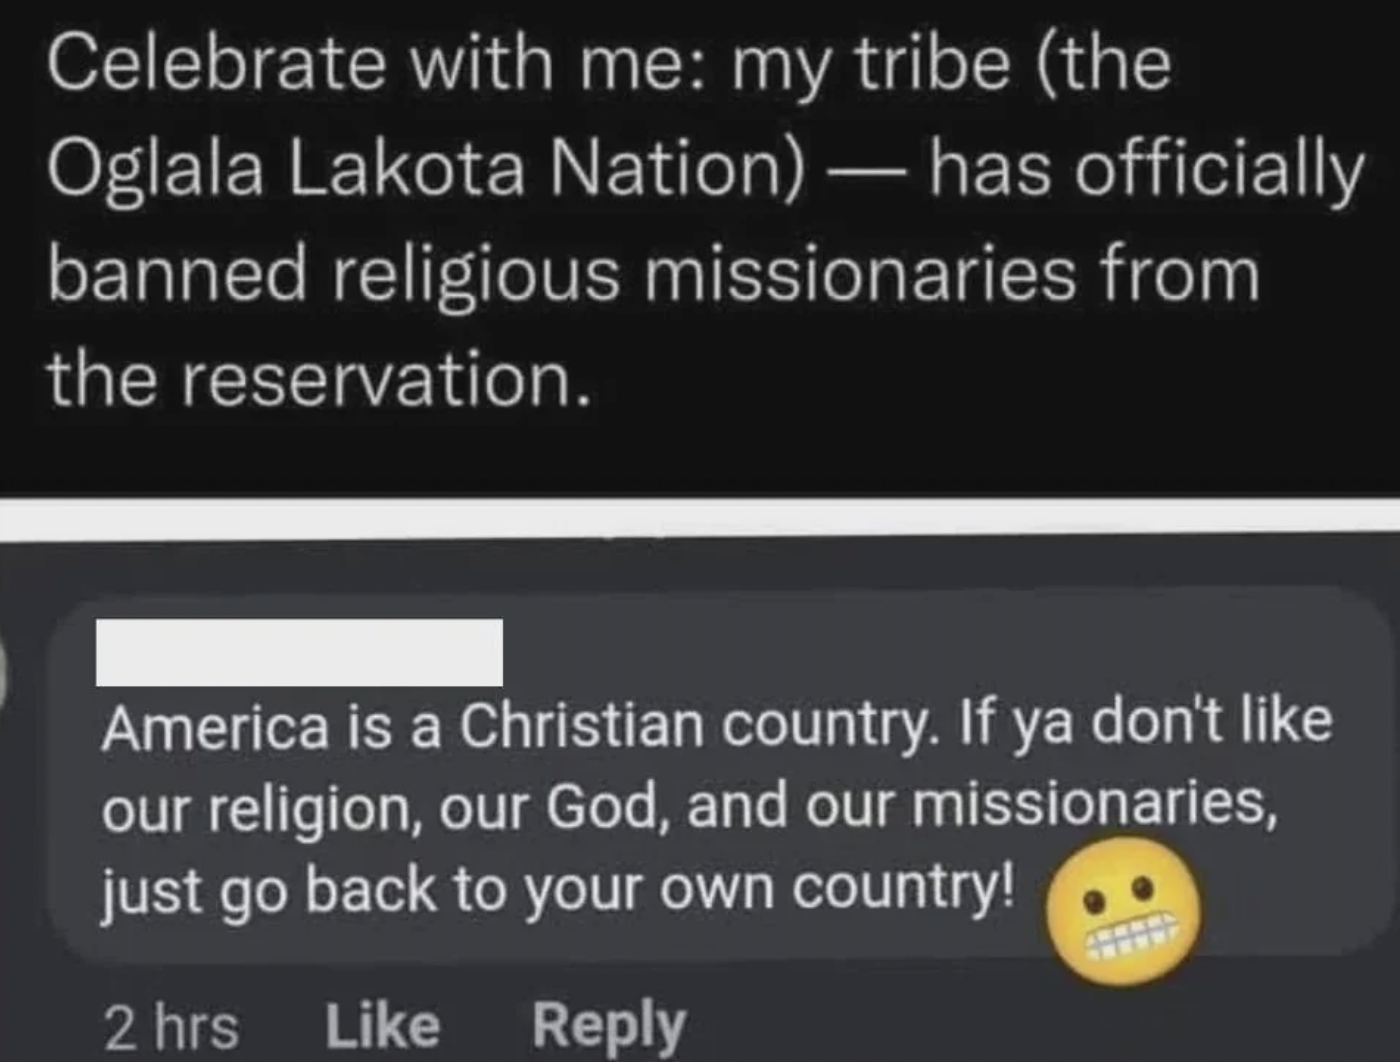 multimedia - Celebrate with me my tribe the Oglala Lakota Nation has officially banned religious missionaries from the reservation. America is a Christian country. If ya don't our religion, our God, and our missionaries, just go back to your own country! 